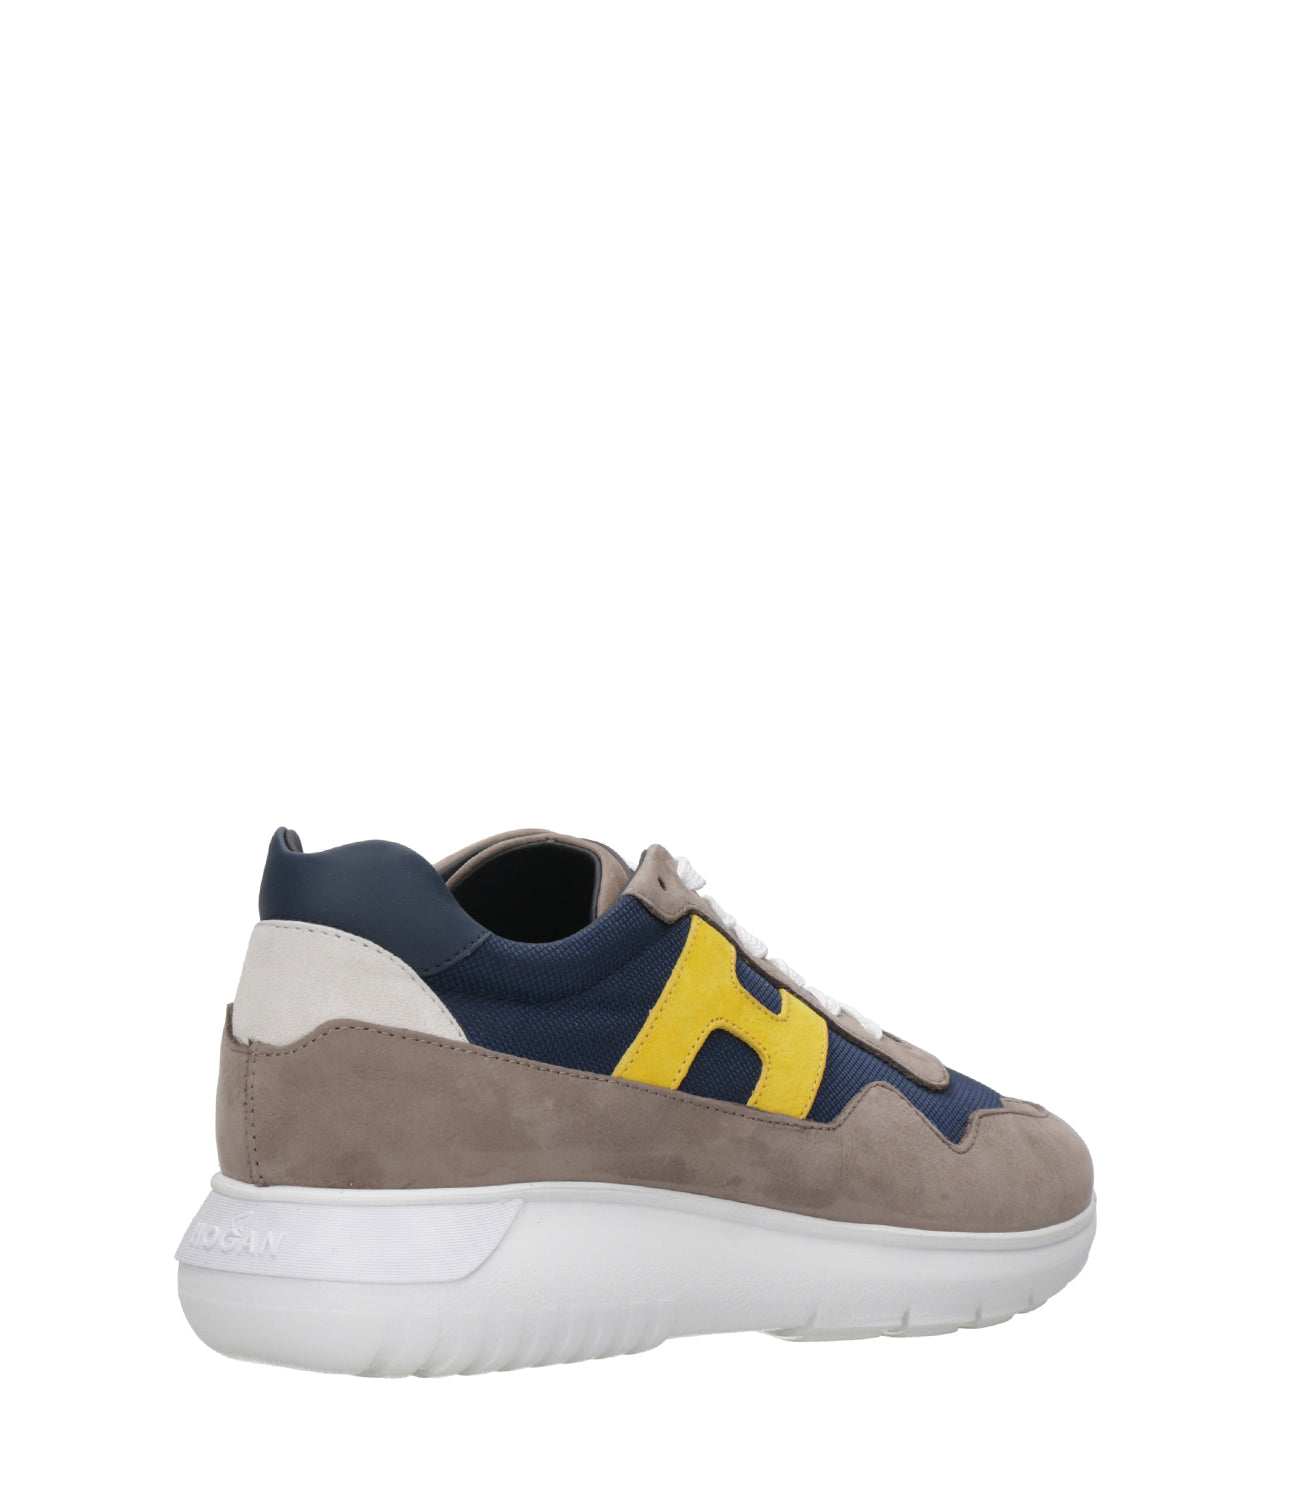 Hogan | Sneakers Interactive 3 Blue, Yellow and Grey